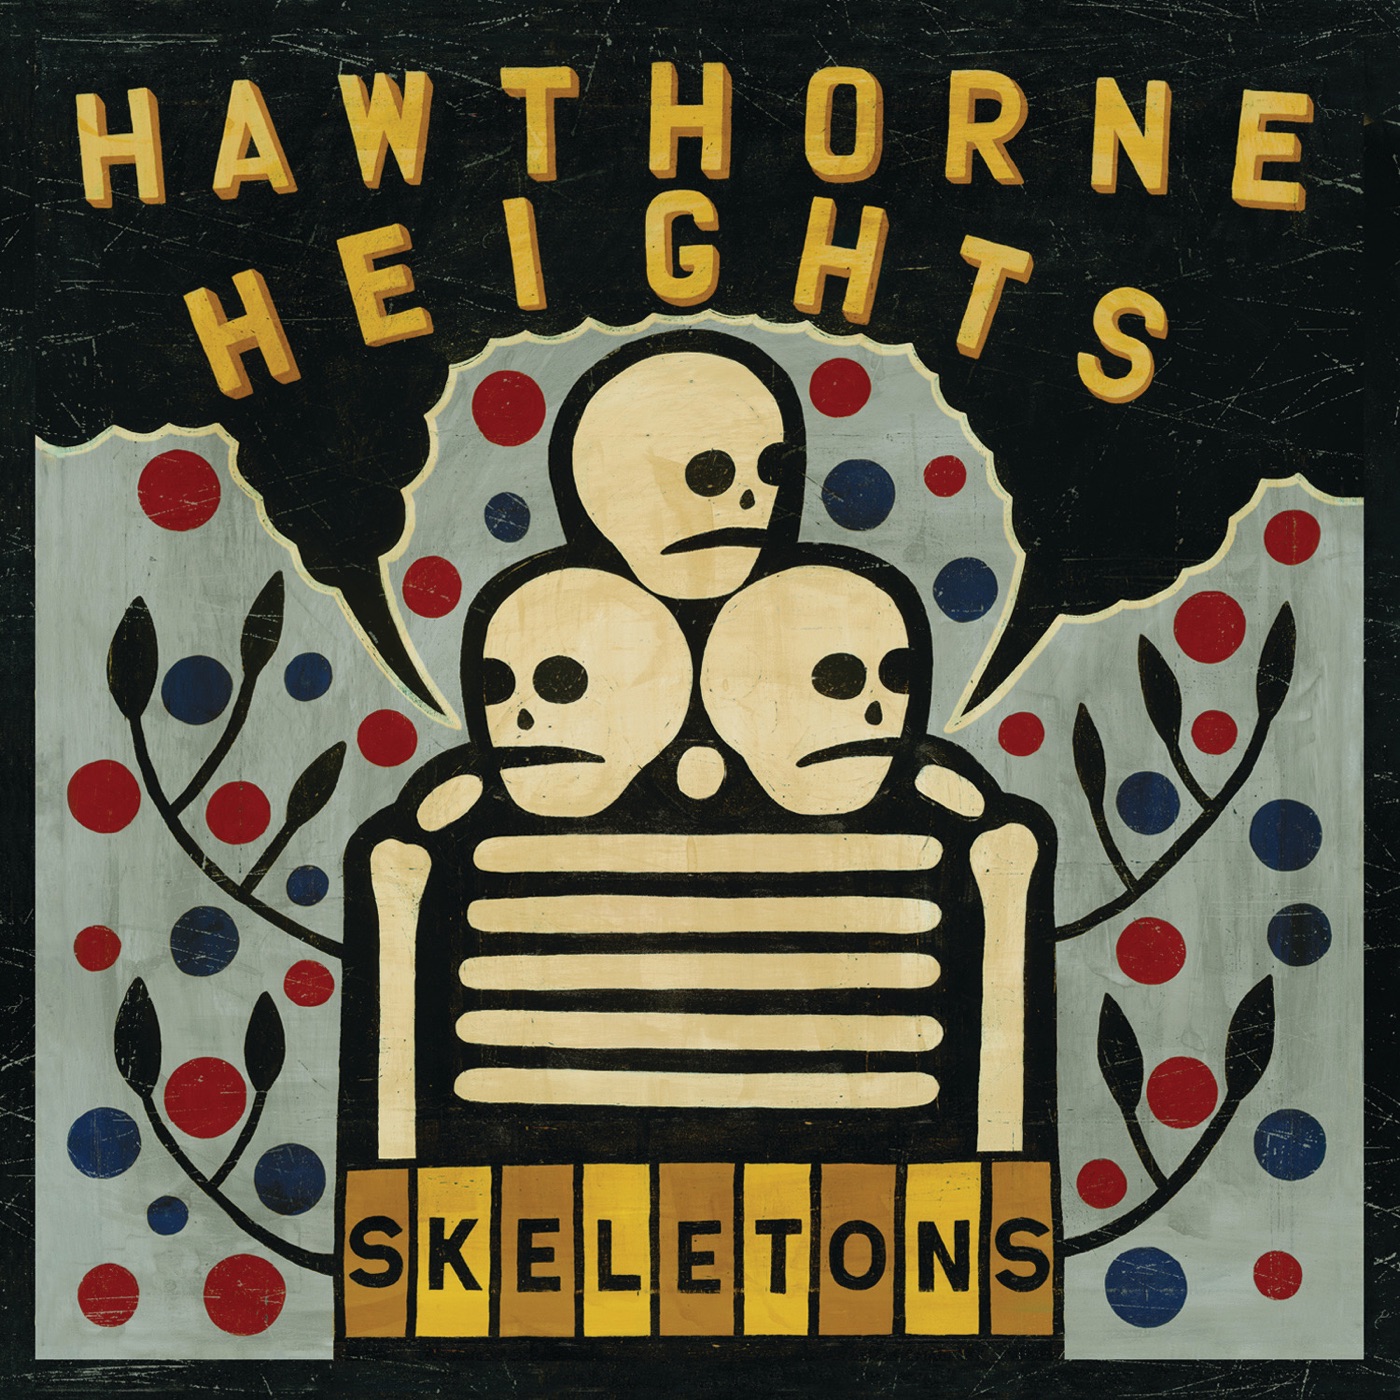 Skeletons by Hawthorne Heights